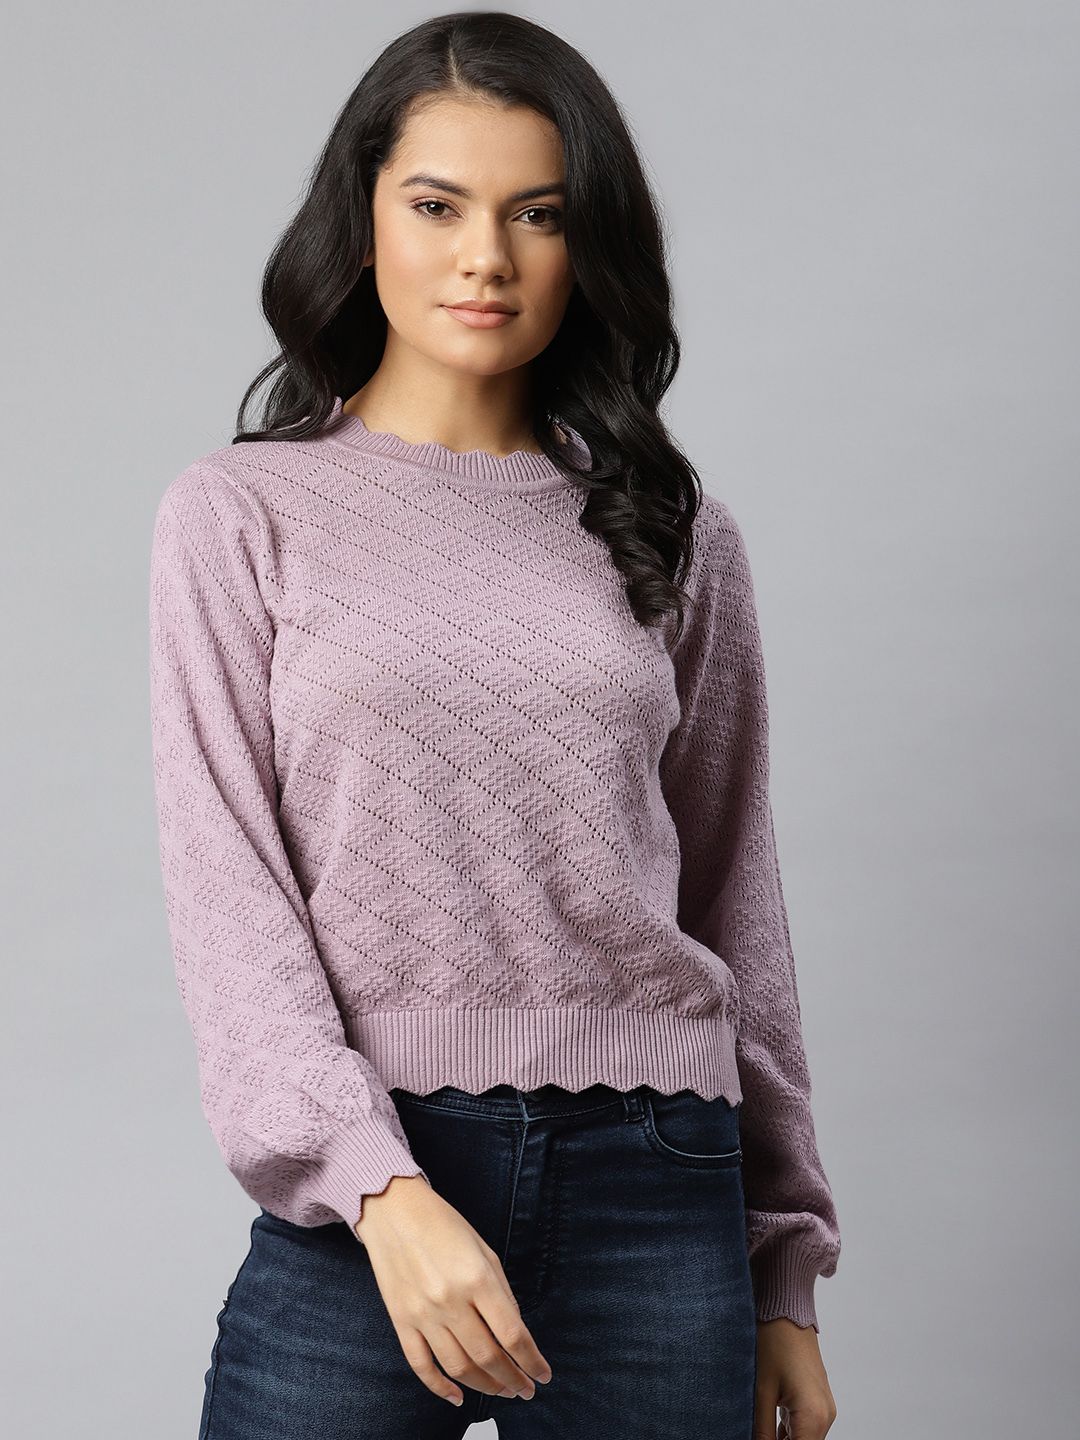 The Roadster Lifestyle Co Lavender Geometric Puff Sleeve Crochet Knit Blouson Top Price in India